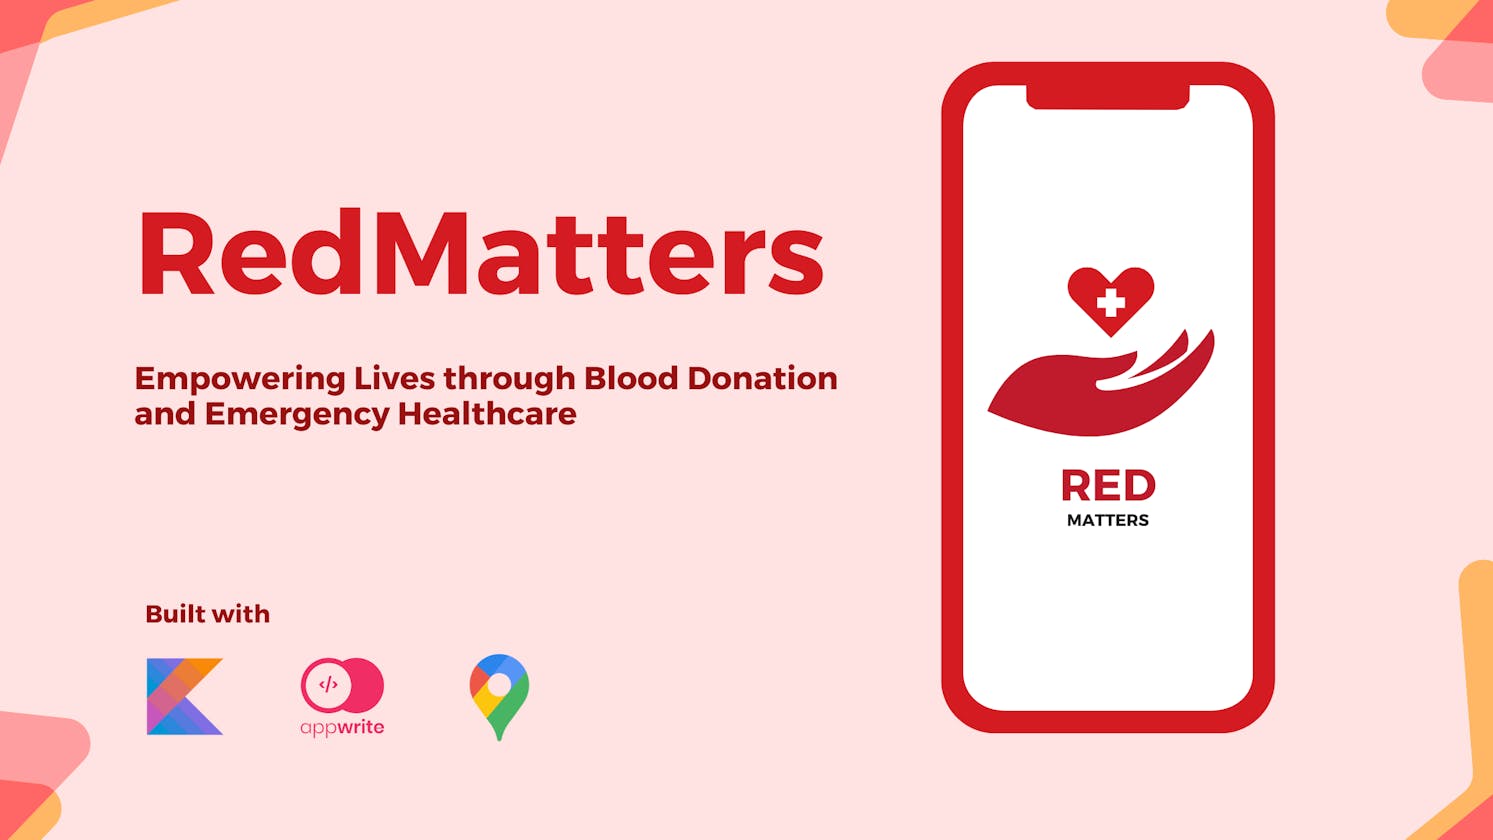 RedMatters: Empowering Lives through Blood Donation and Emergency Healthcare